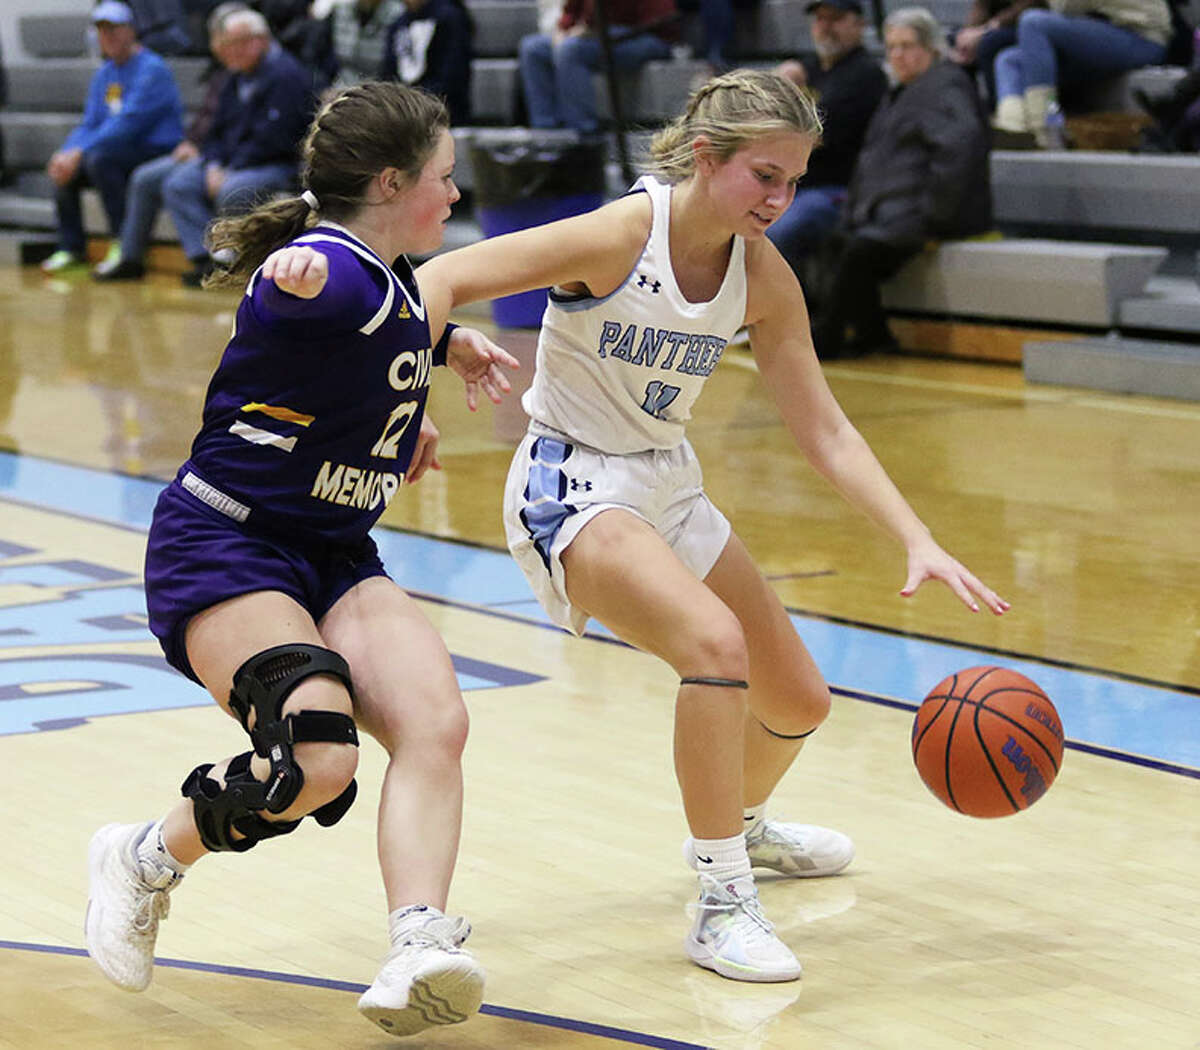 Jersey's Cali Breden (right) handles the ball against defensive pressure from CM's Aubree Wallace on Thursday night in a MVC girls basketball game at Havens Gym in Jerseyville.